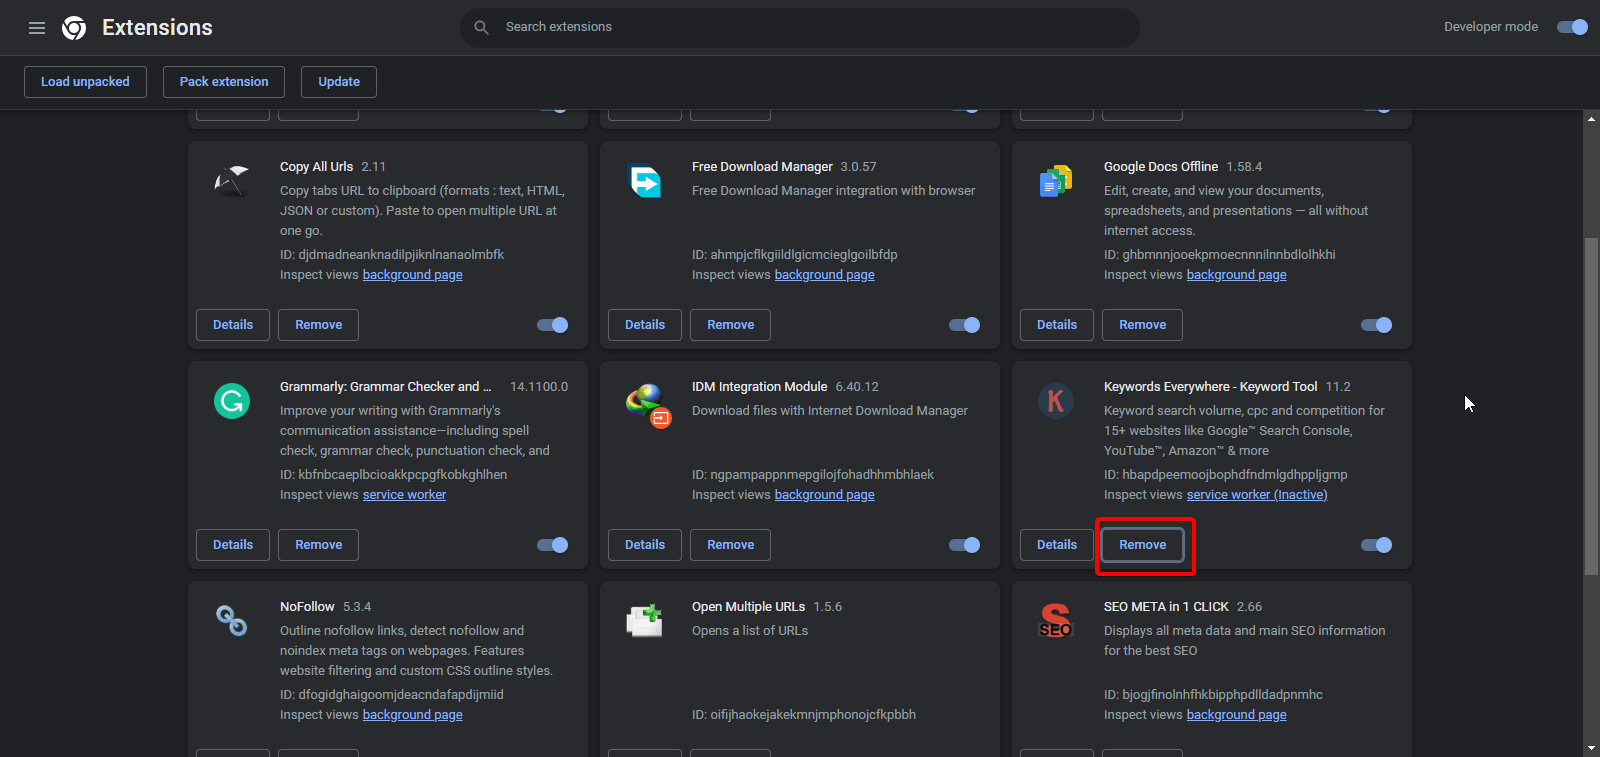 How to uninstall extensions on Chromebook